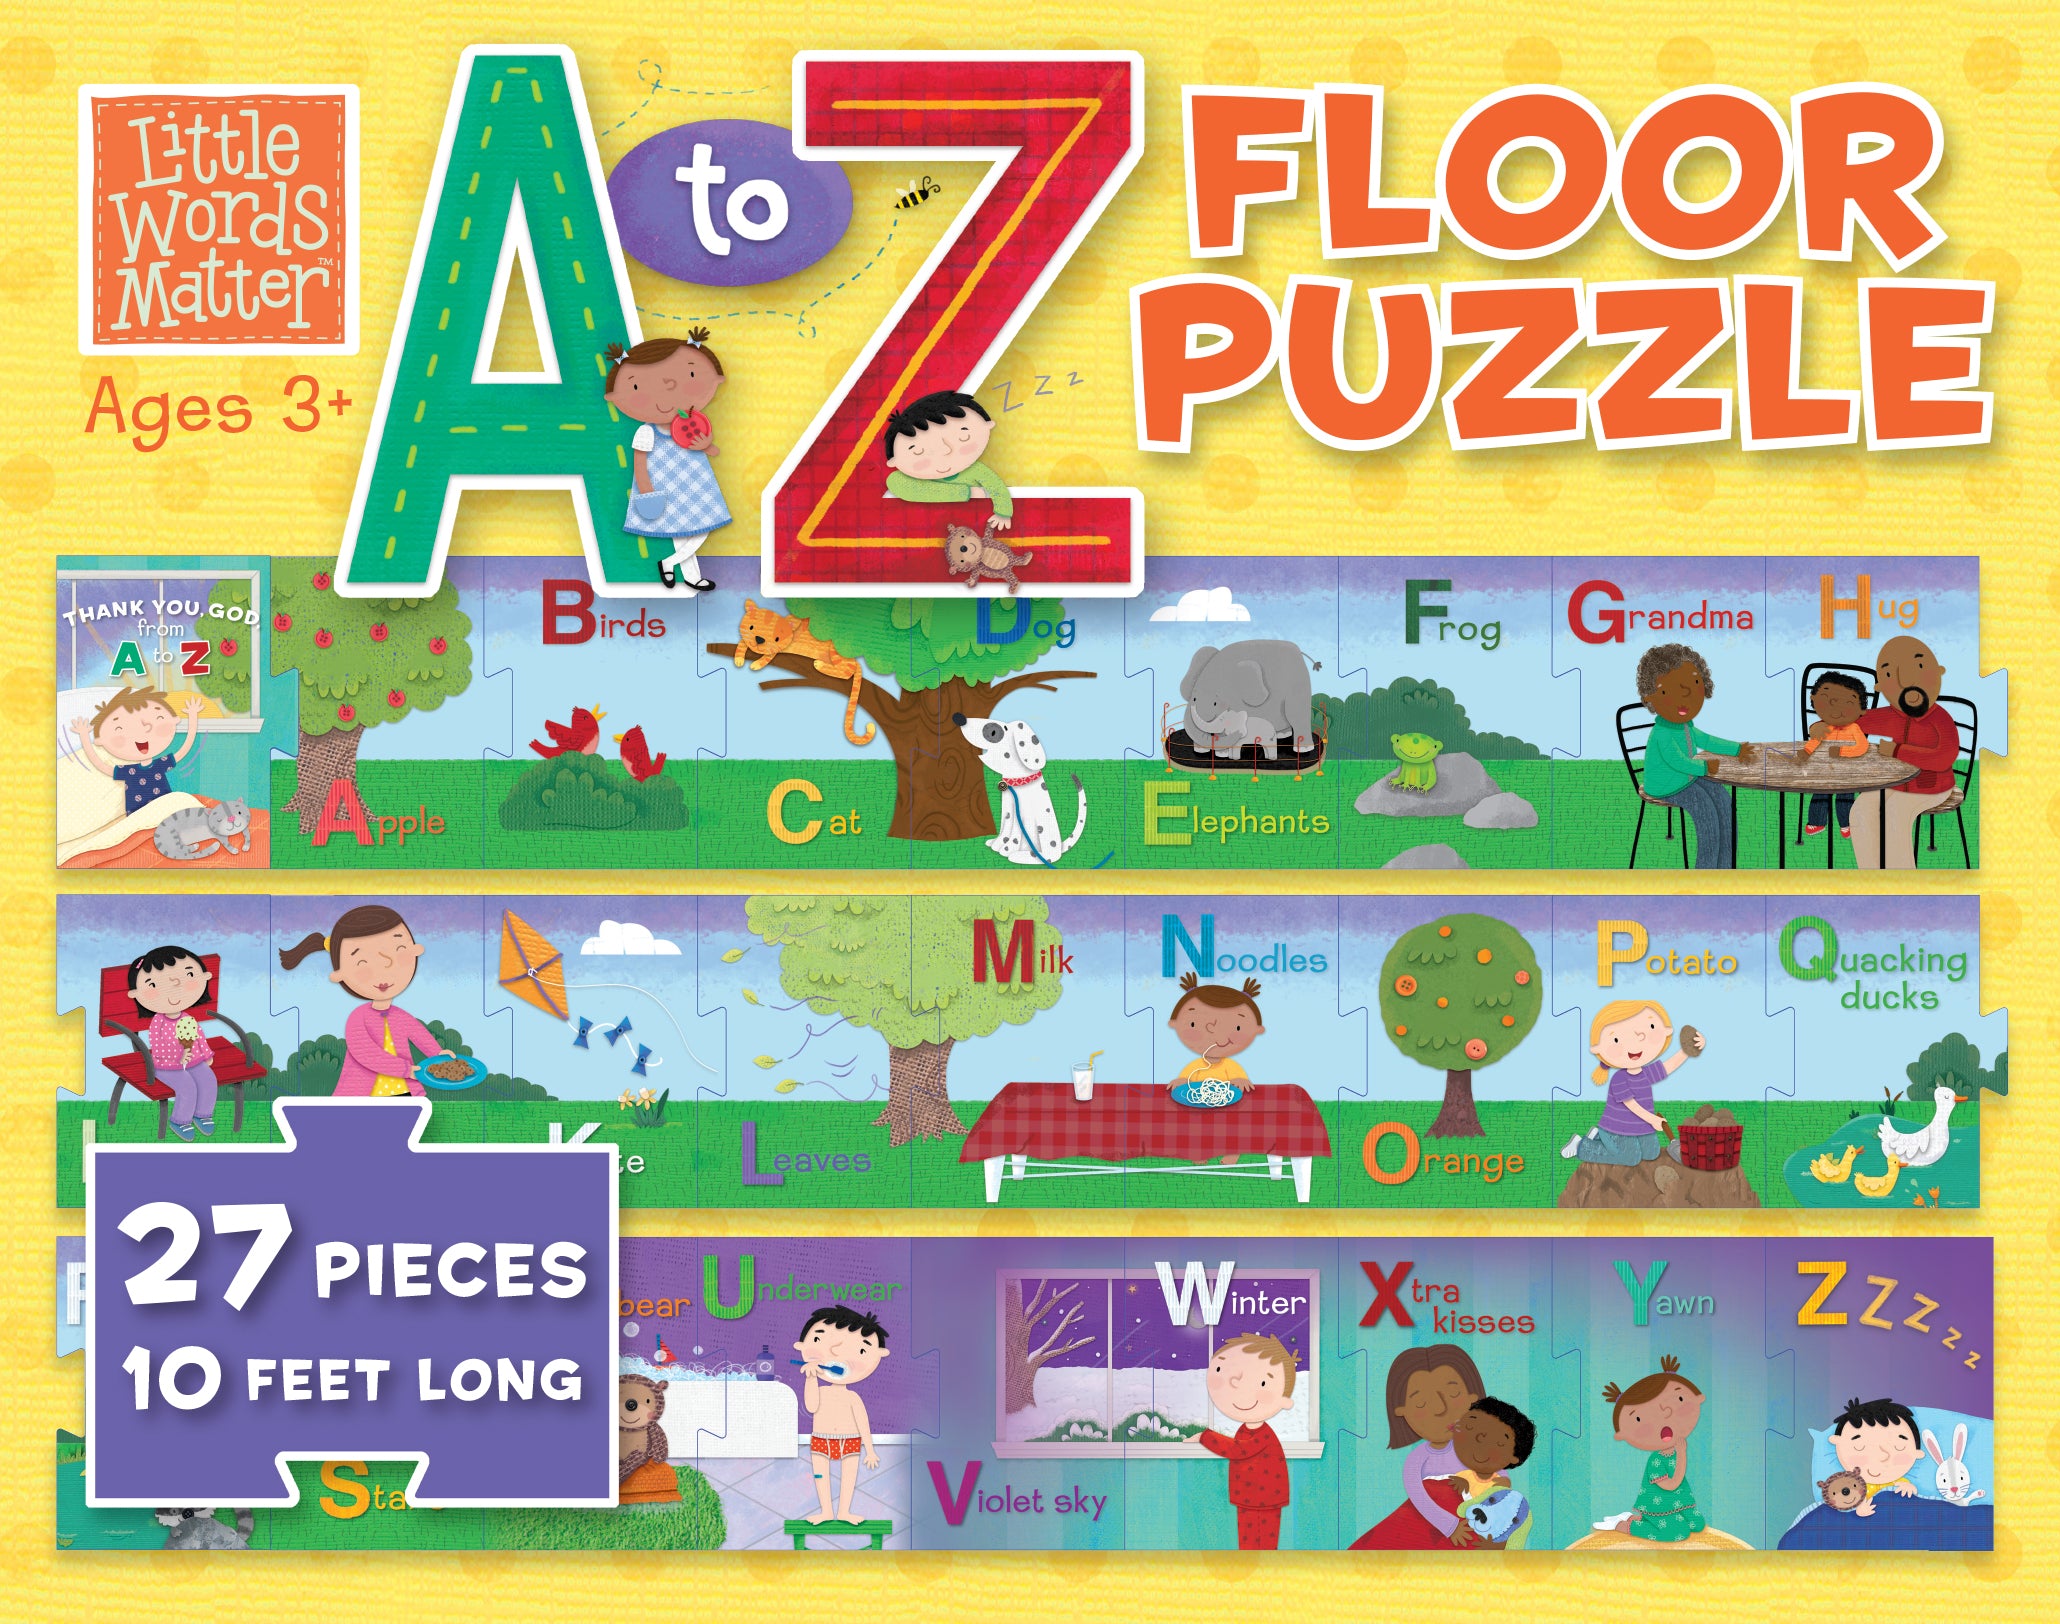 Image of Little Words Matter A to Z Floor Puzzle other